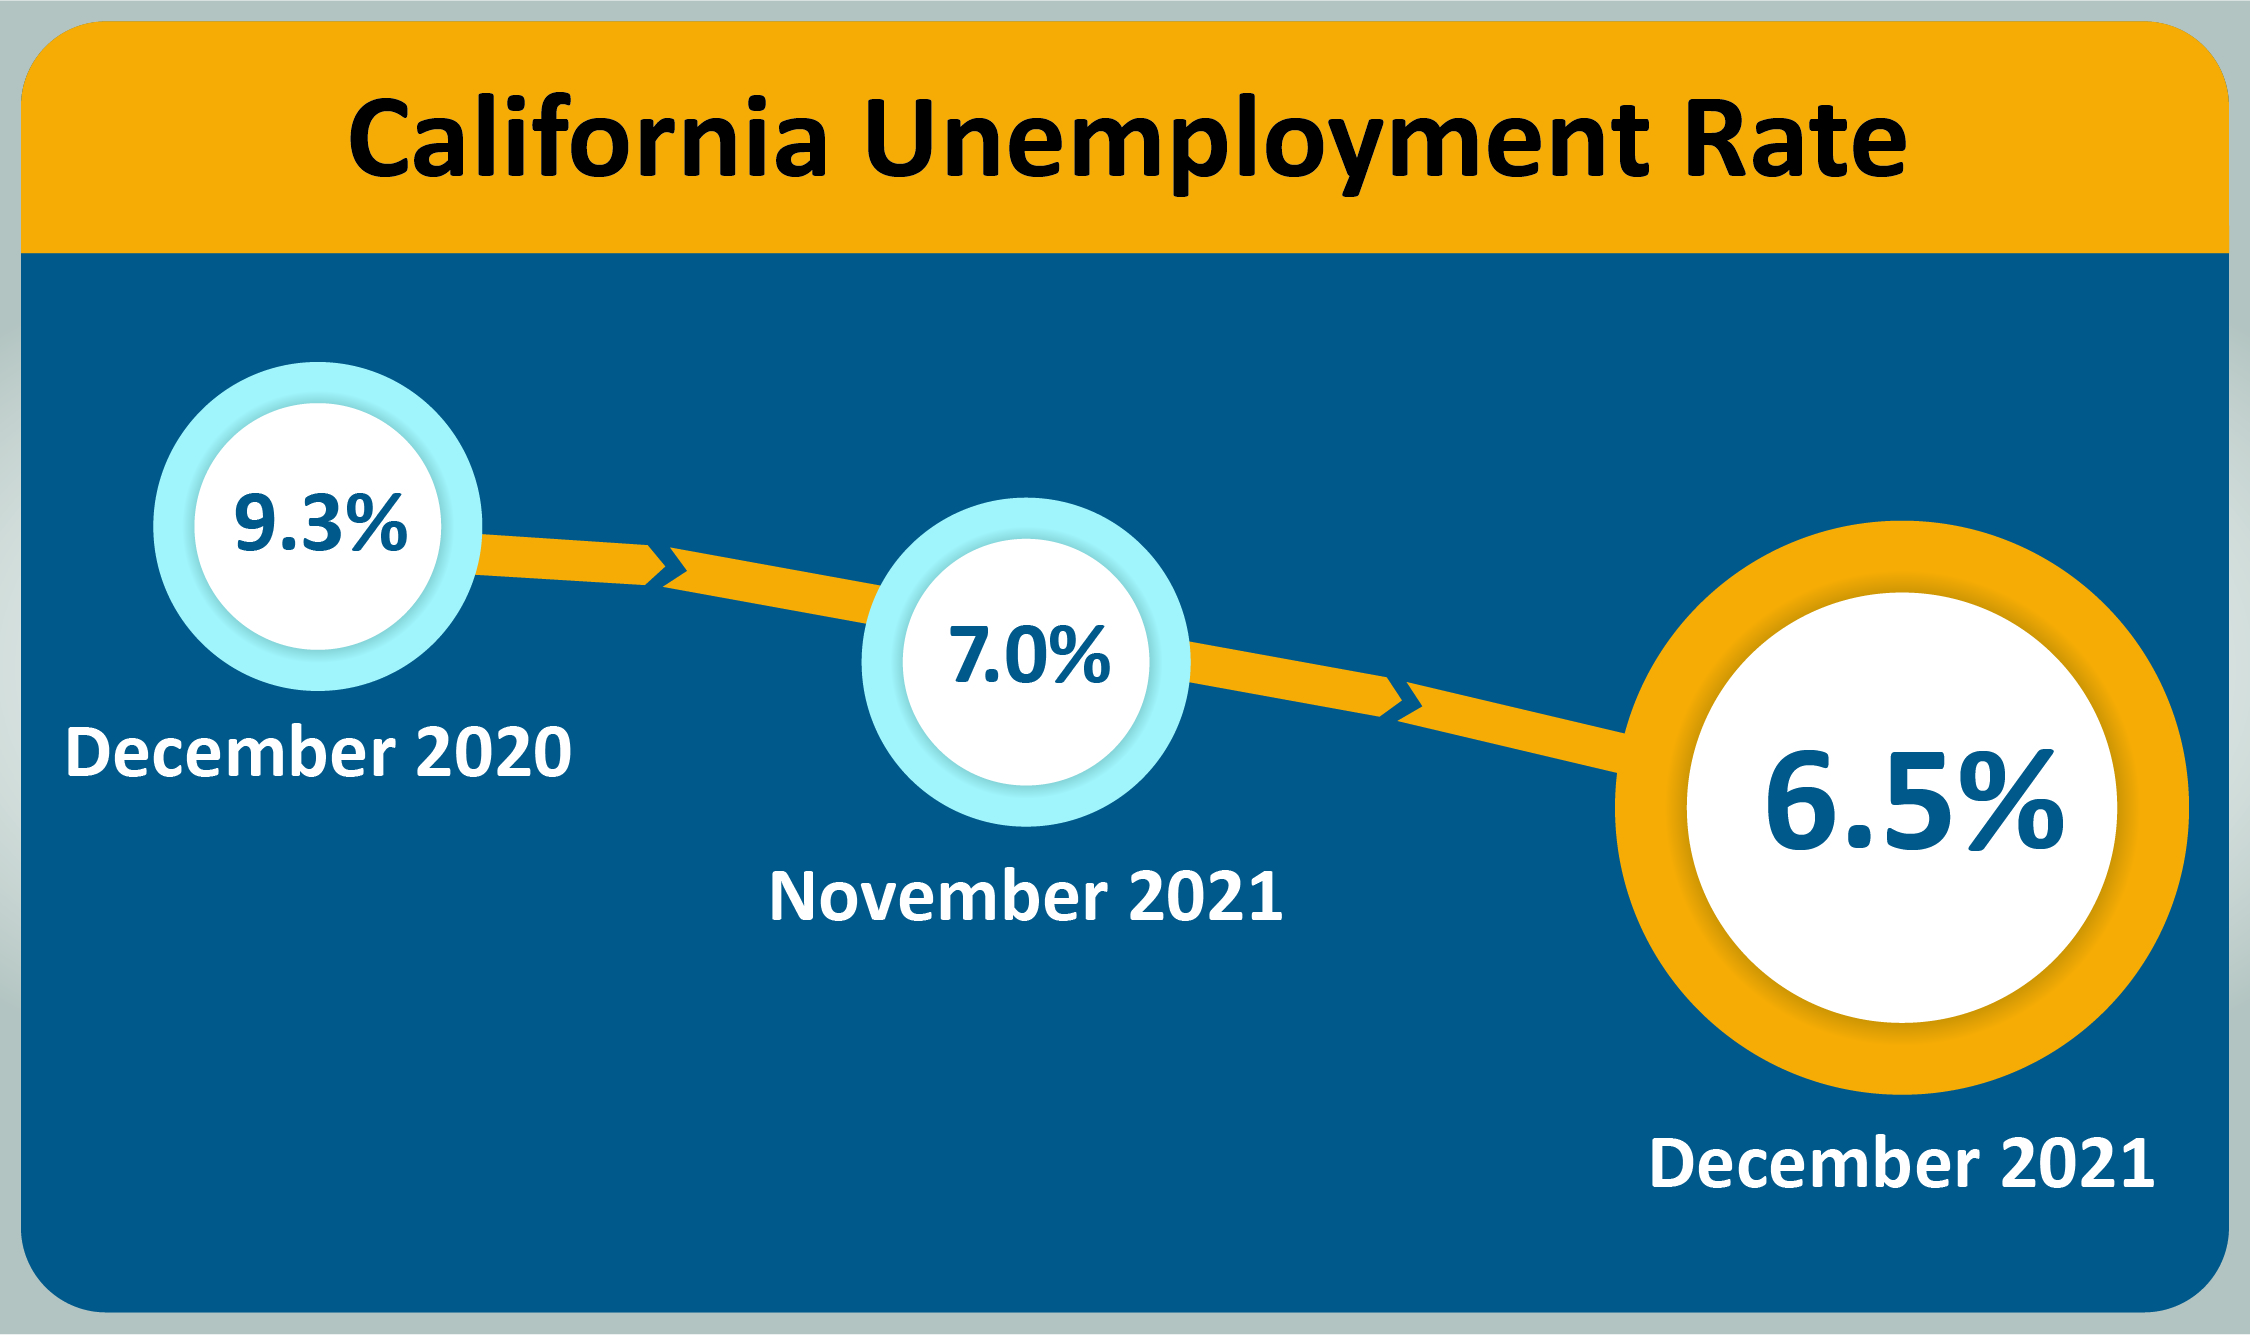 The California unemployment rate drops to 6.5 percent in December 2021 from 9.3 percent in December 2020.